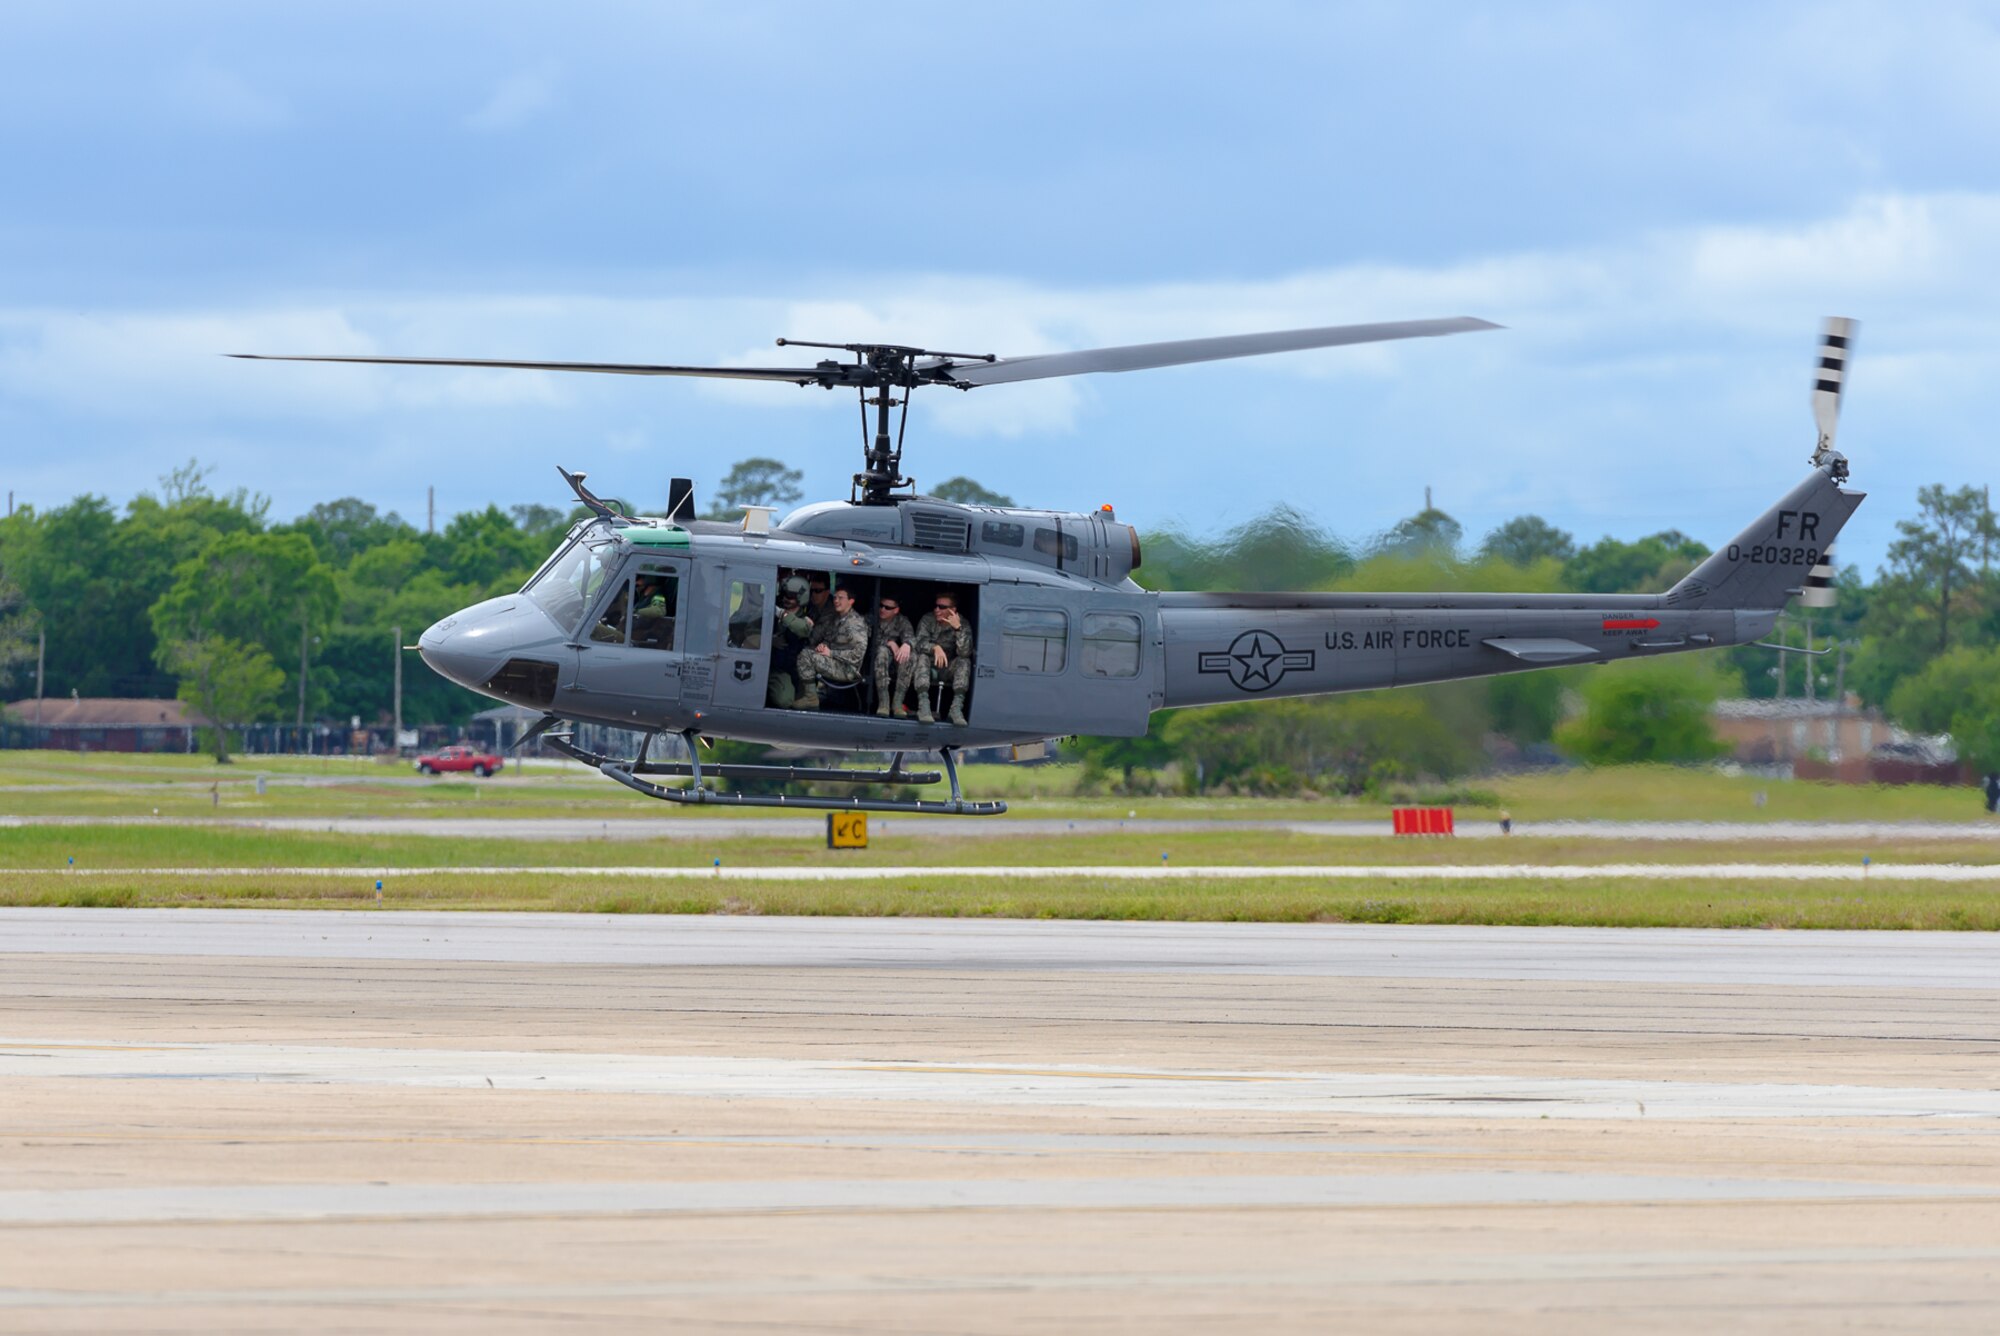 Air Force ROTC cadets from the University of Southern Mississippi ride in a TH-1H helicopter as part of Pathways to Blue April 7, 2018, on Keesler Air Force Base, Mississippi. Cadets received an orientation flight along with hands-on briefings on technical and flying operations in support of the Air Force’s Diversity Strategic Roadmap program. Keesler was home to 280 cadets from 15 universities April 6-7 as part of Pathways to Blue, a diversity outreach event hosted by the 2nd Air Force.  (U.S. Air Force photo by Andre’ Askew)